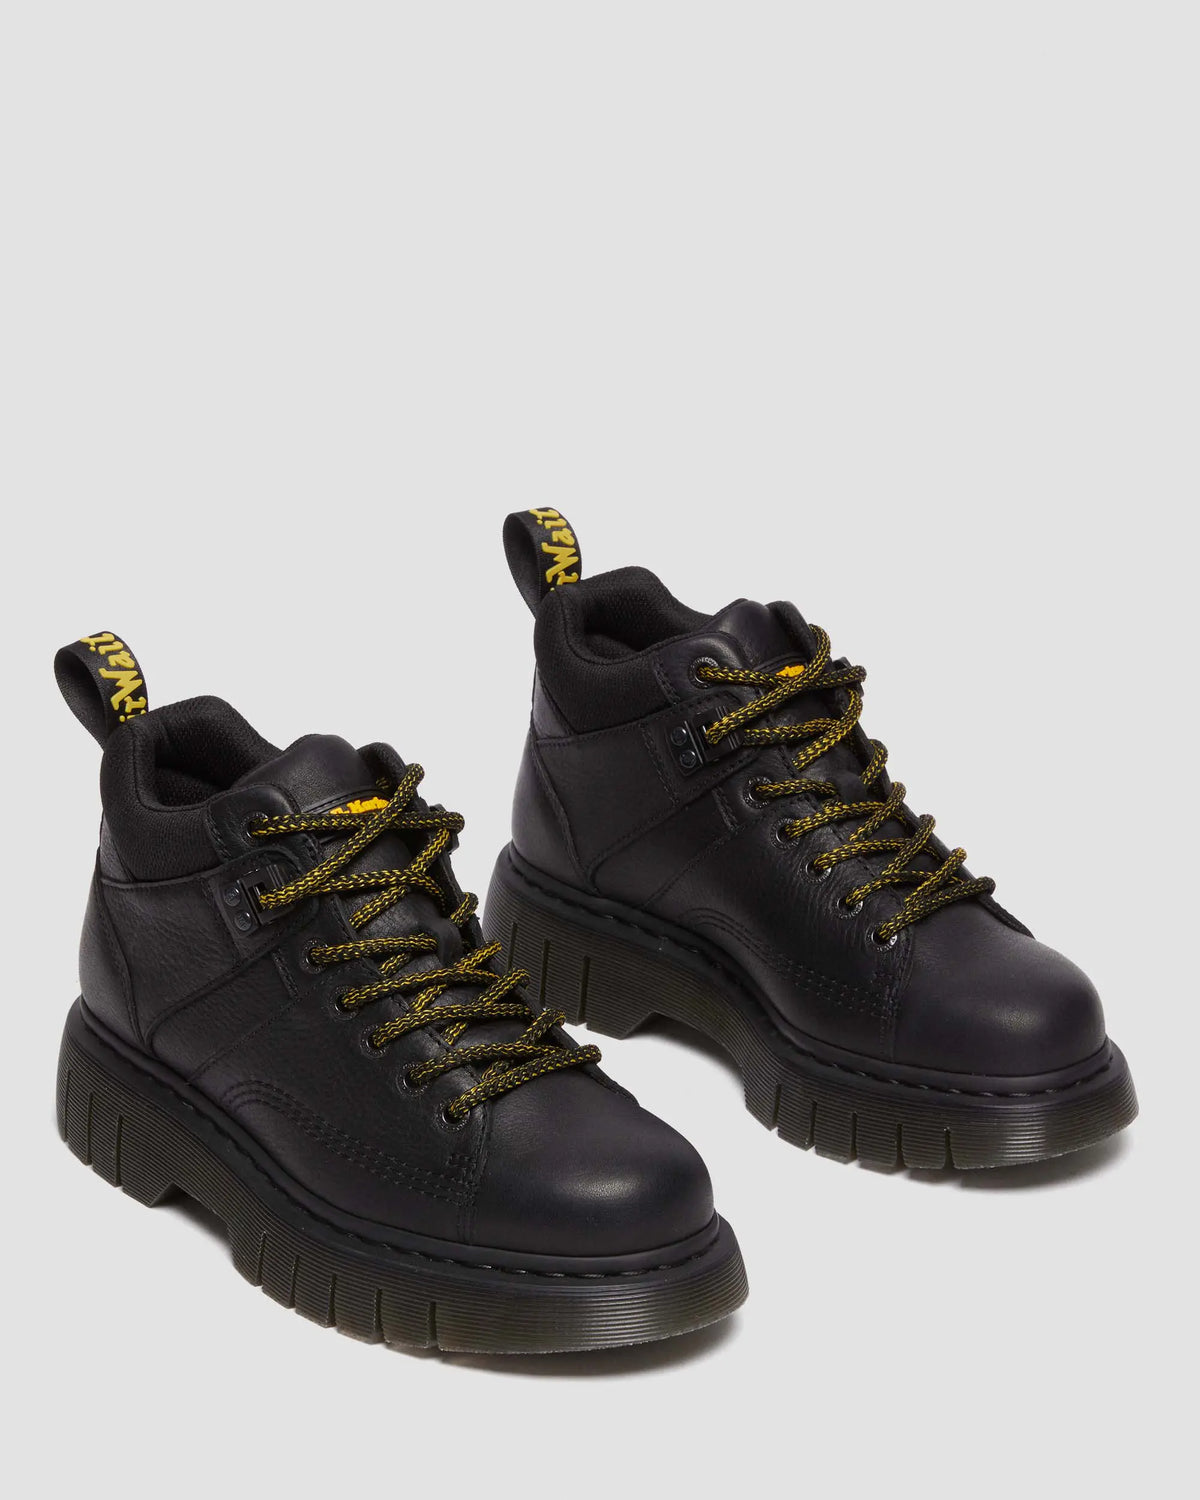 Dr. Martens, Woodard Black Grizzly